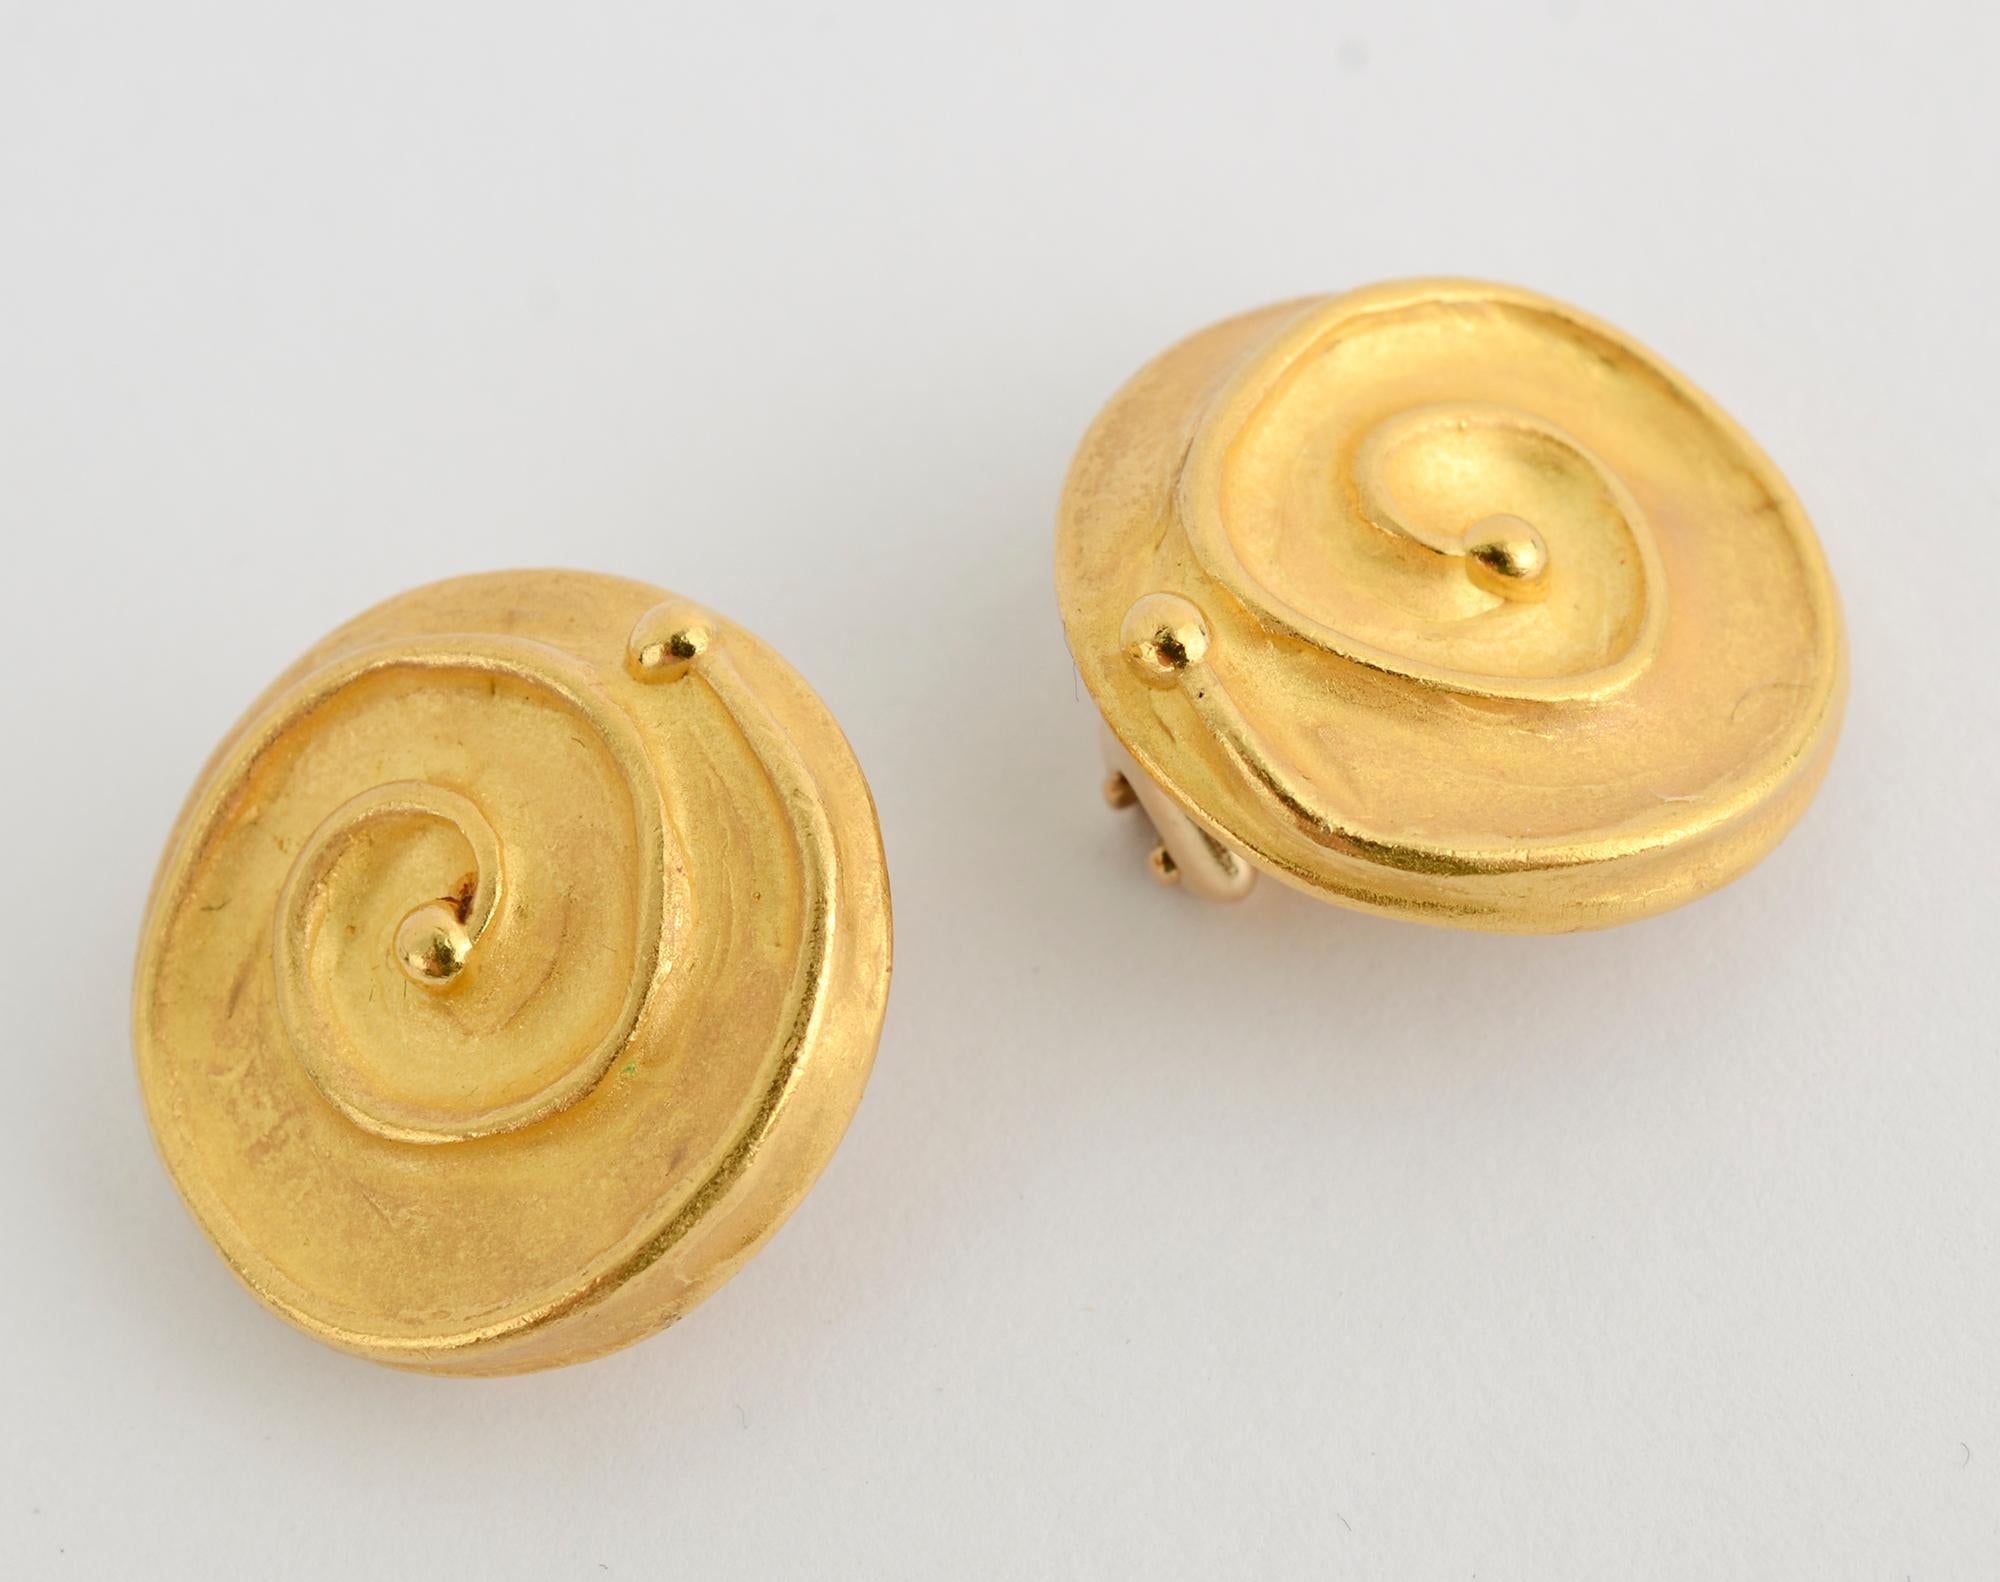 Women's or Men's Denise Roberge Gold Button Earrings with Coiled Design